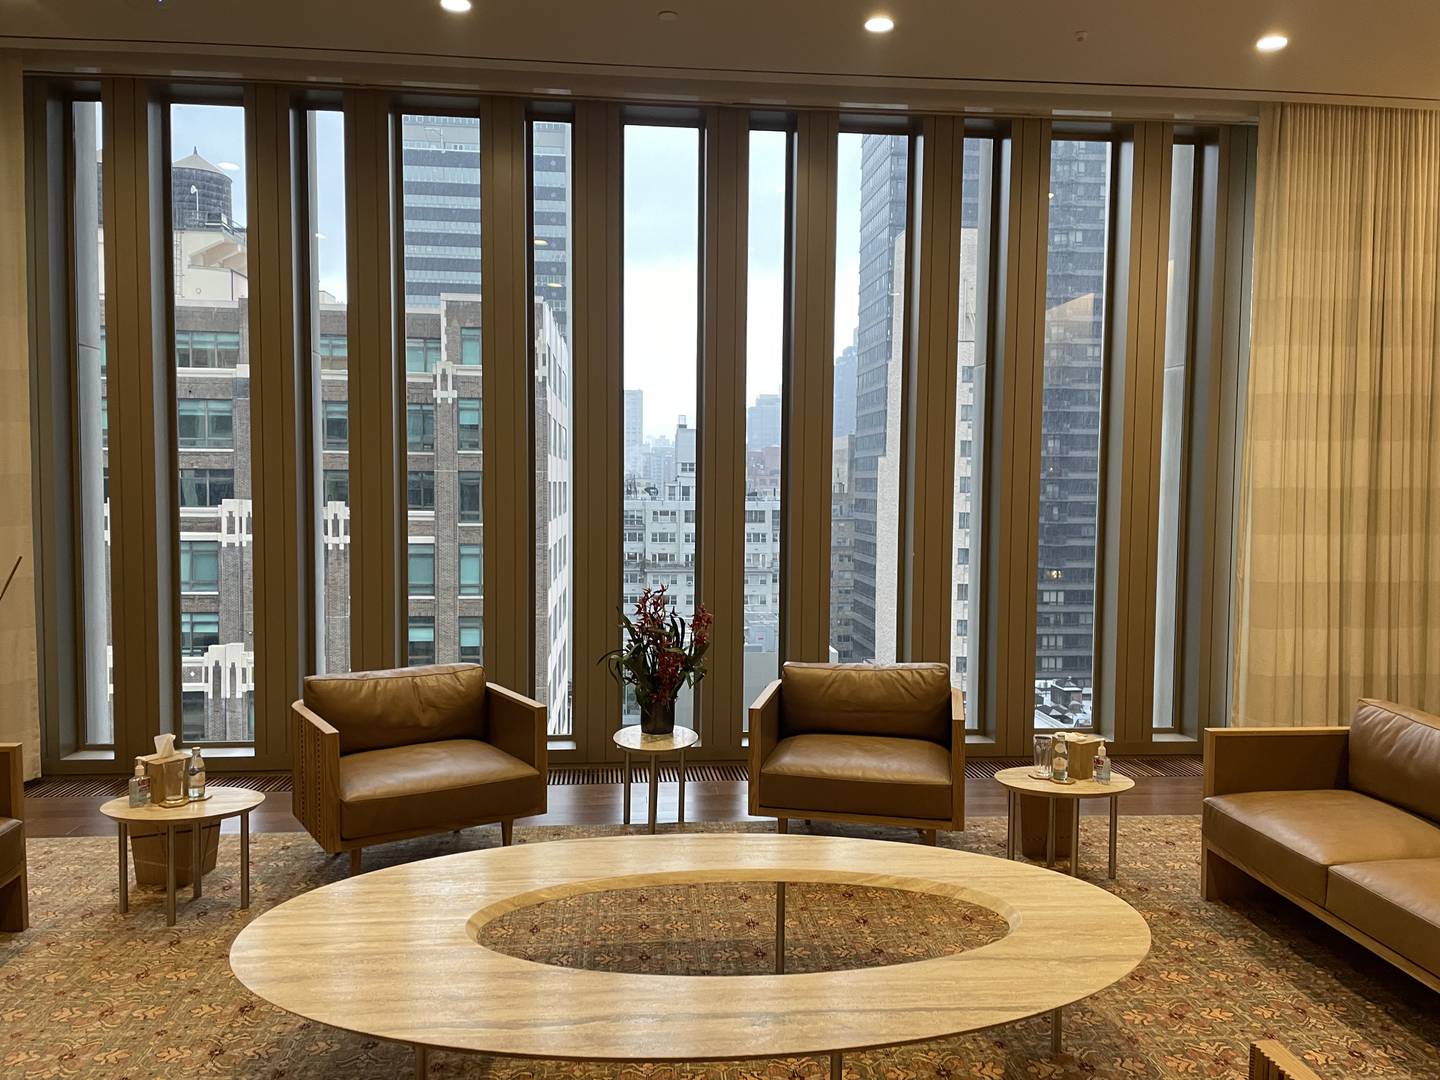 A seating area in front of a window overlooking New York at the UAE's UN mission. Bryant Harris / The National